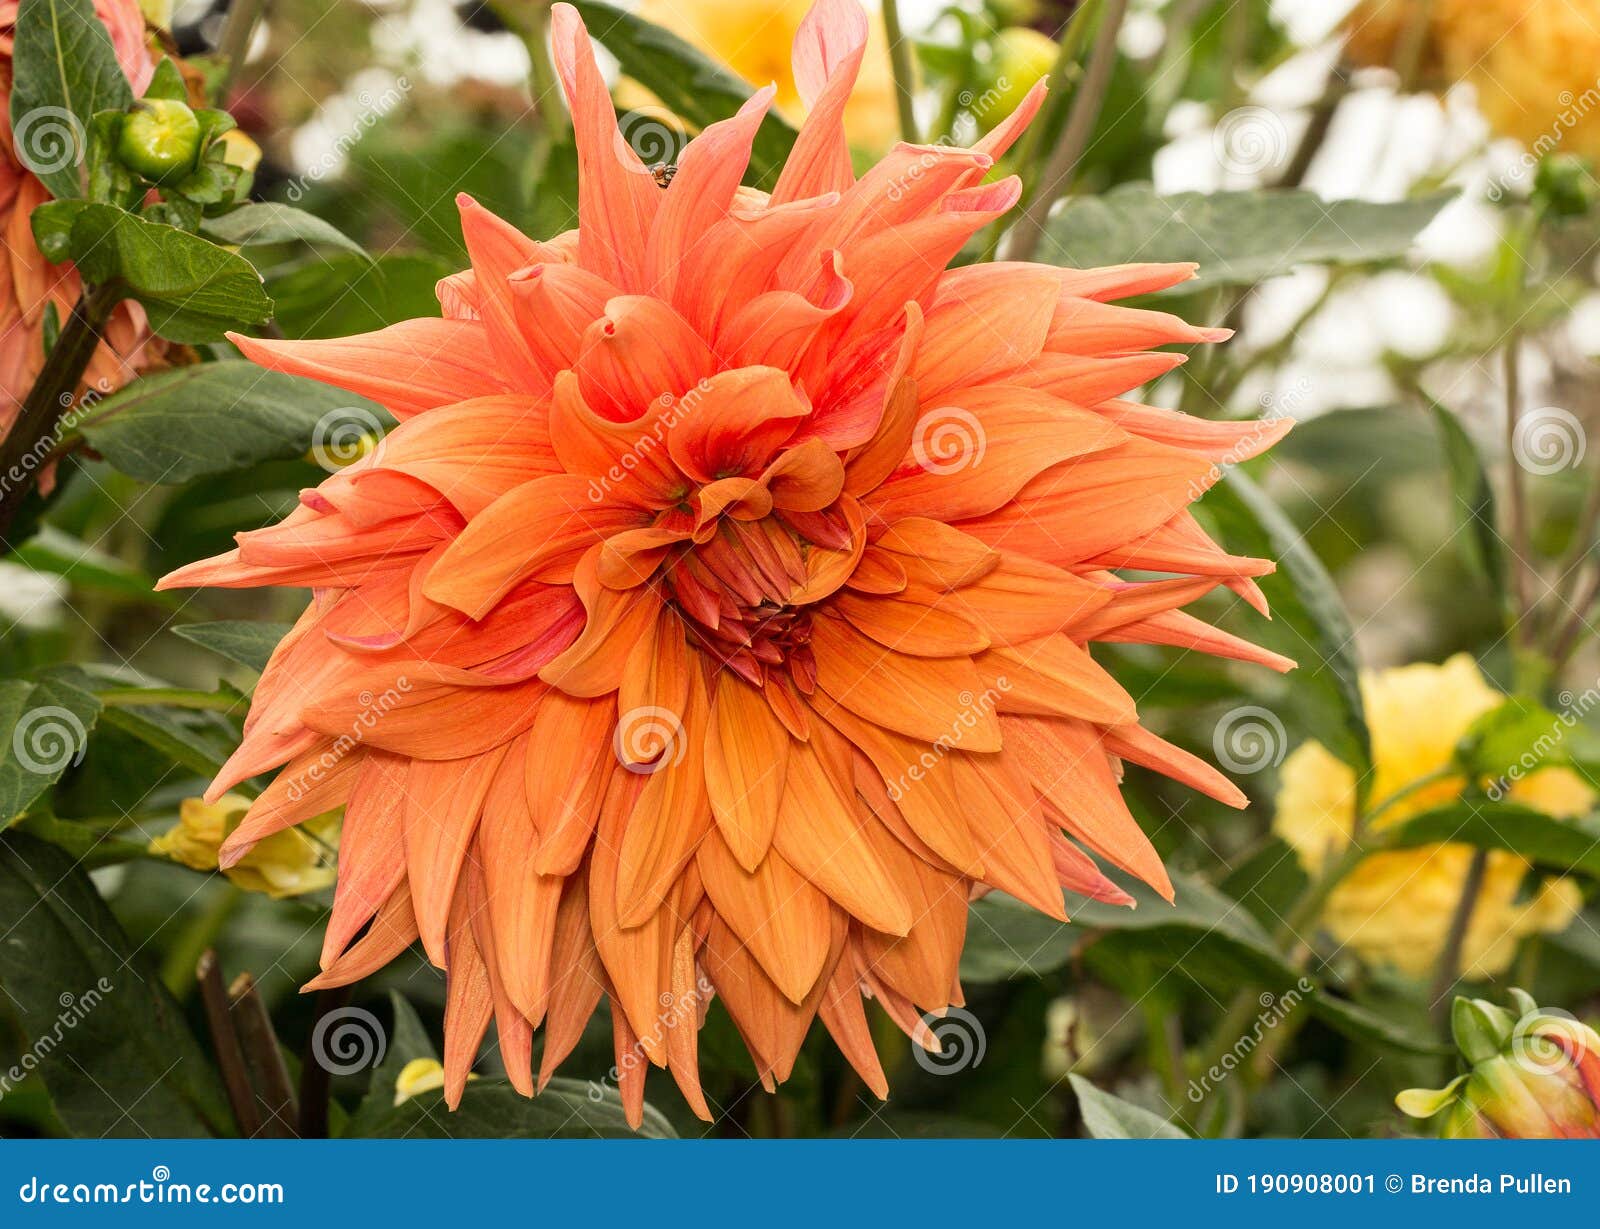 mophead dahlia growing in a bed of various dahlias